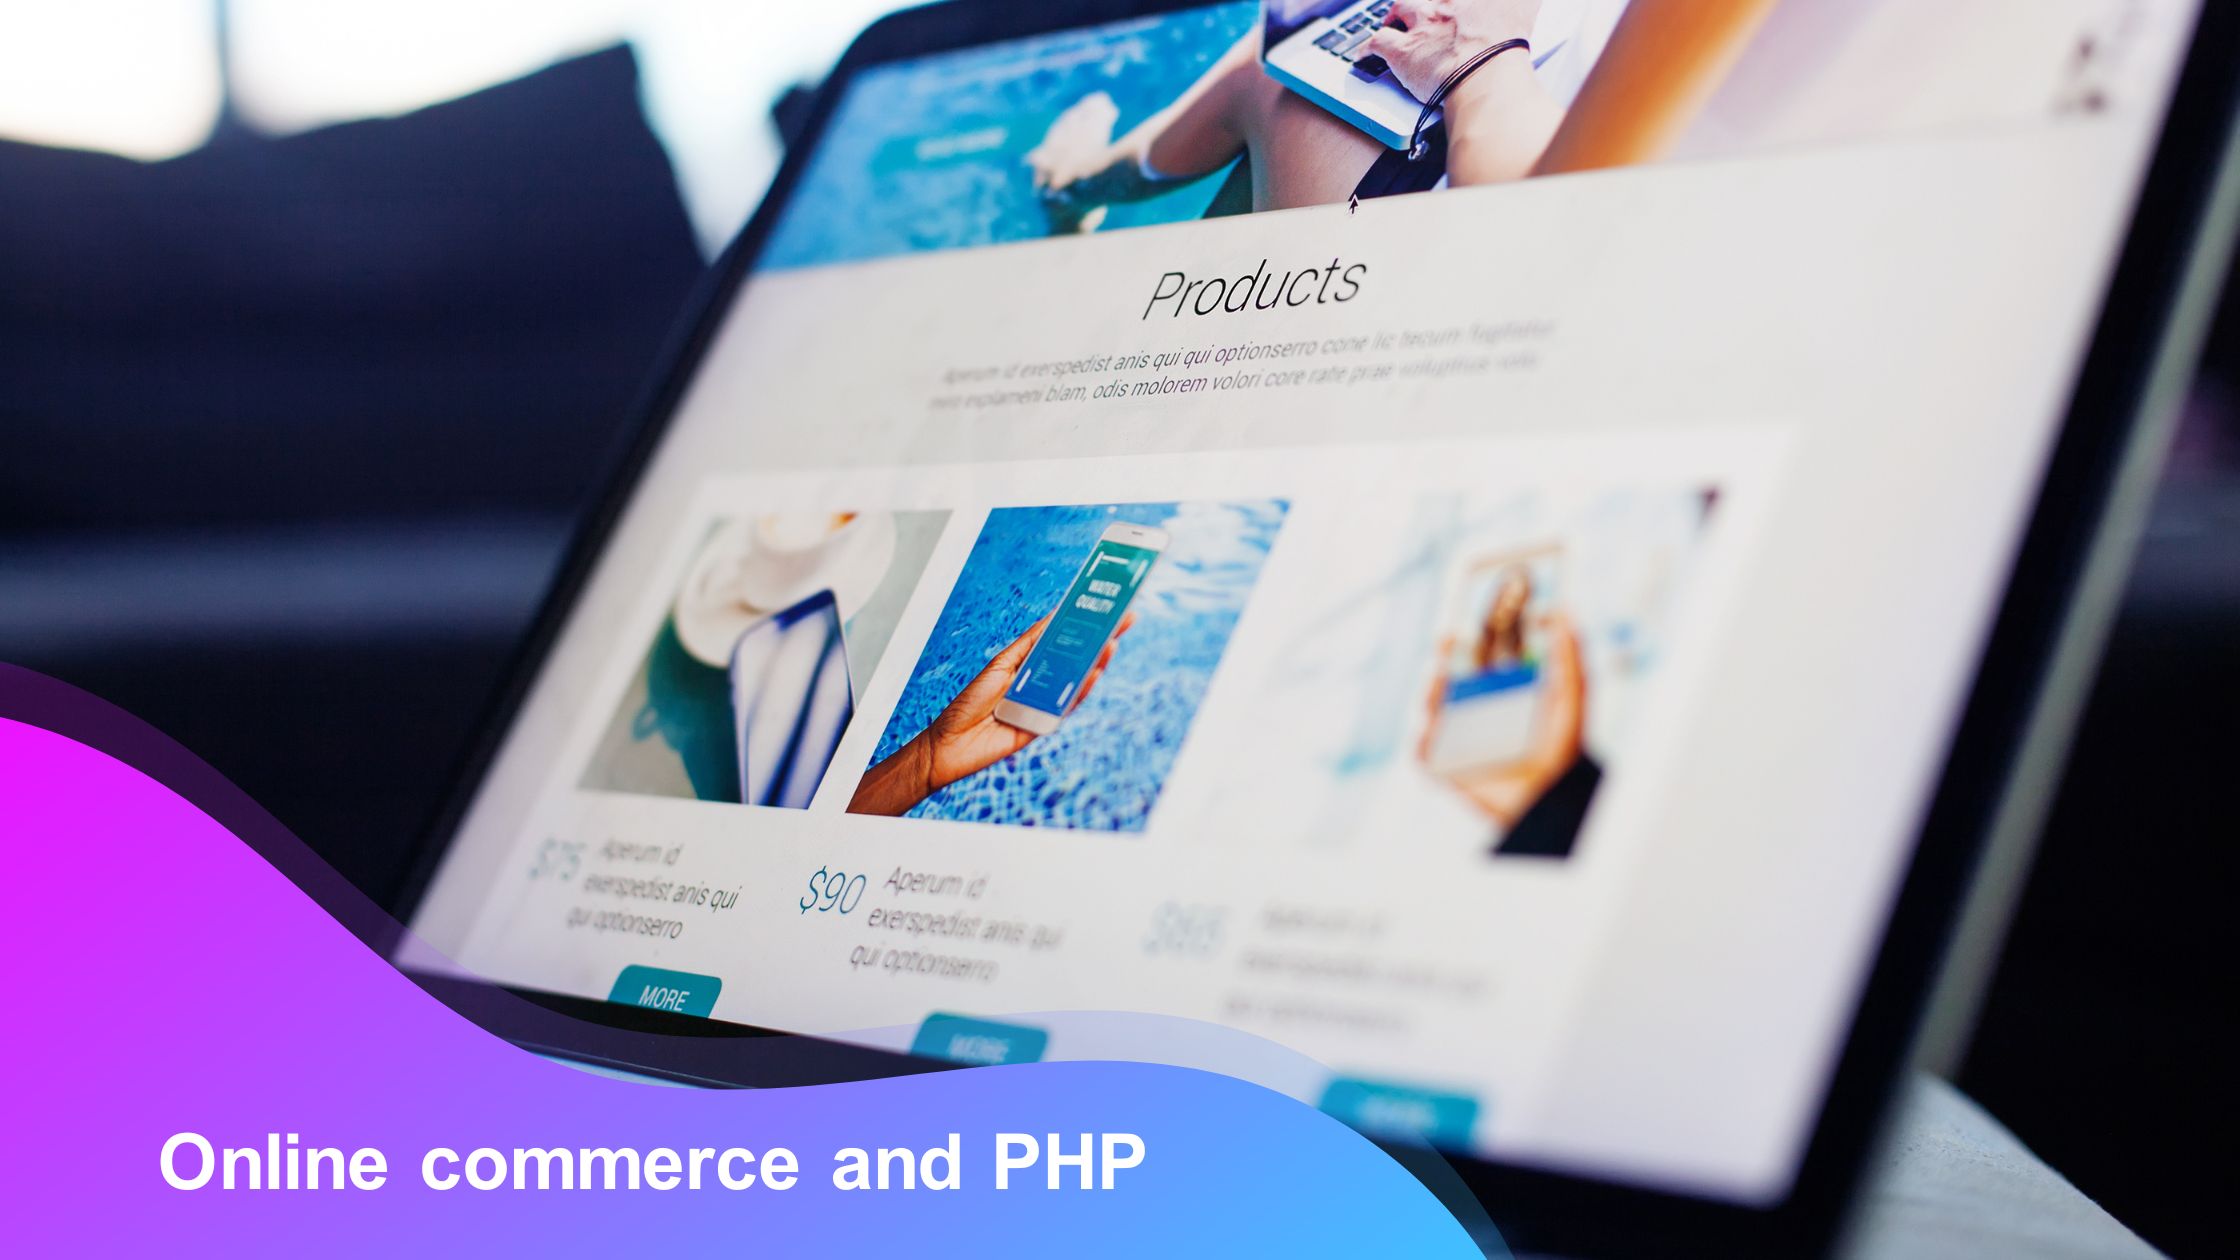 Online commerce and PHP